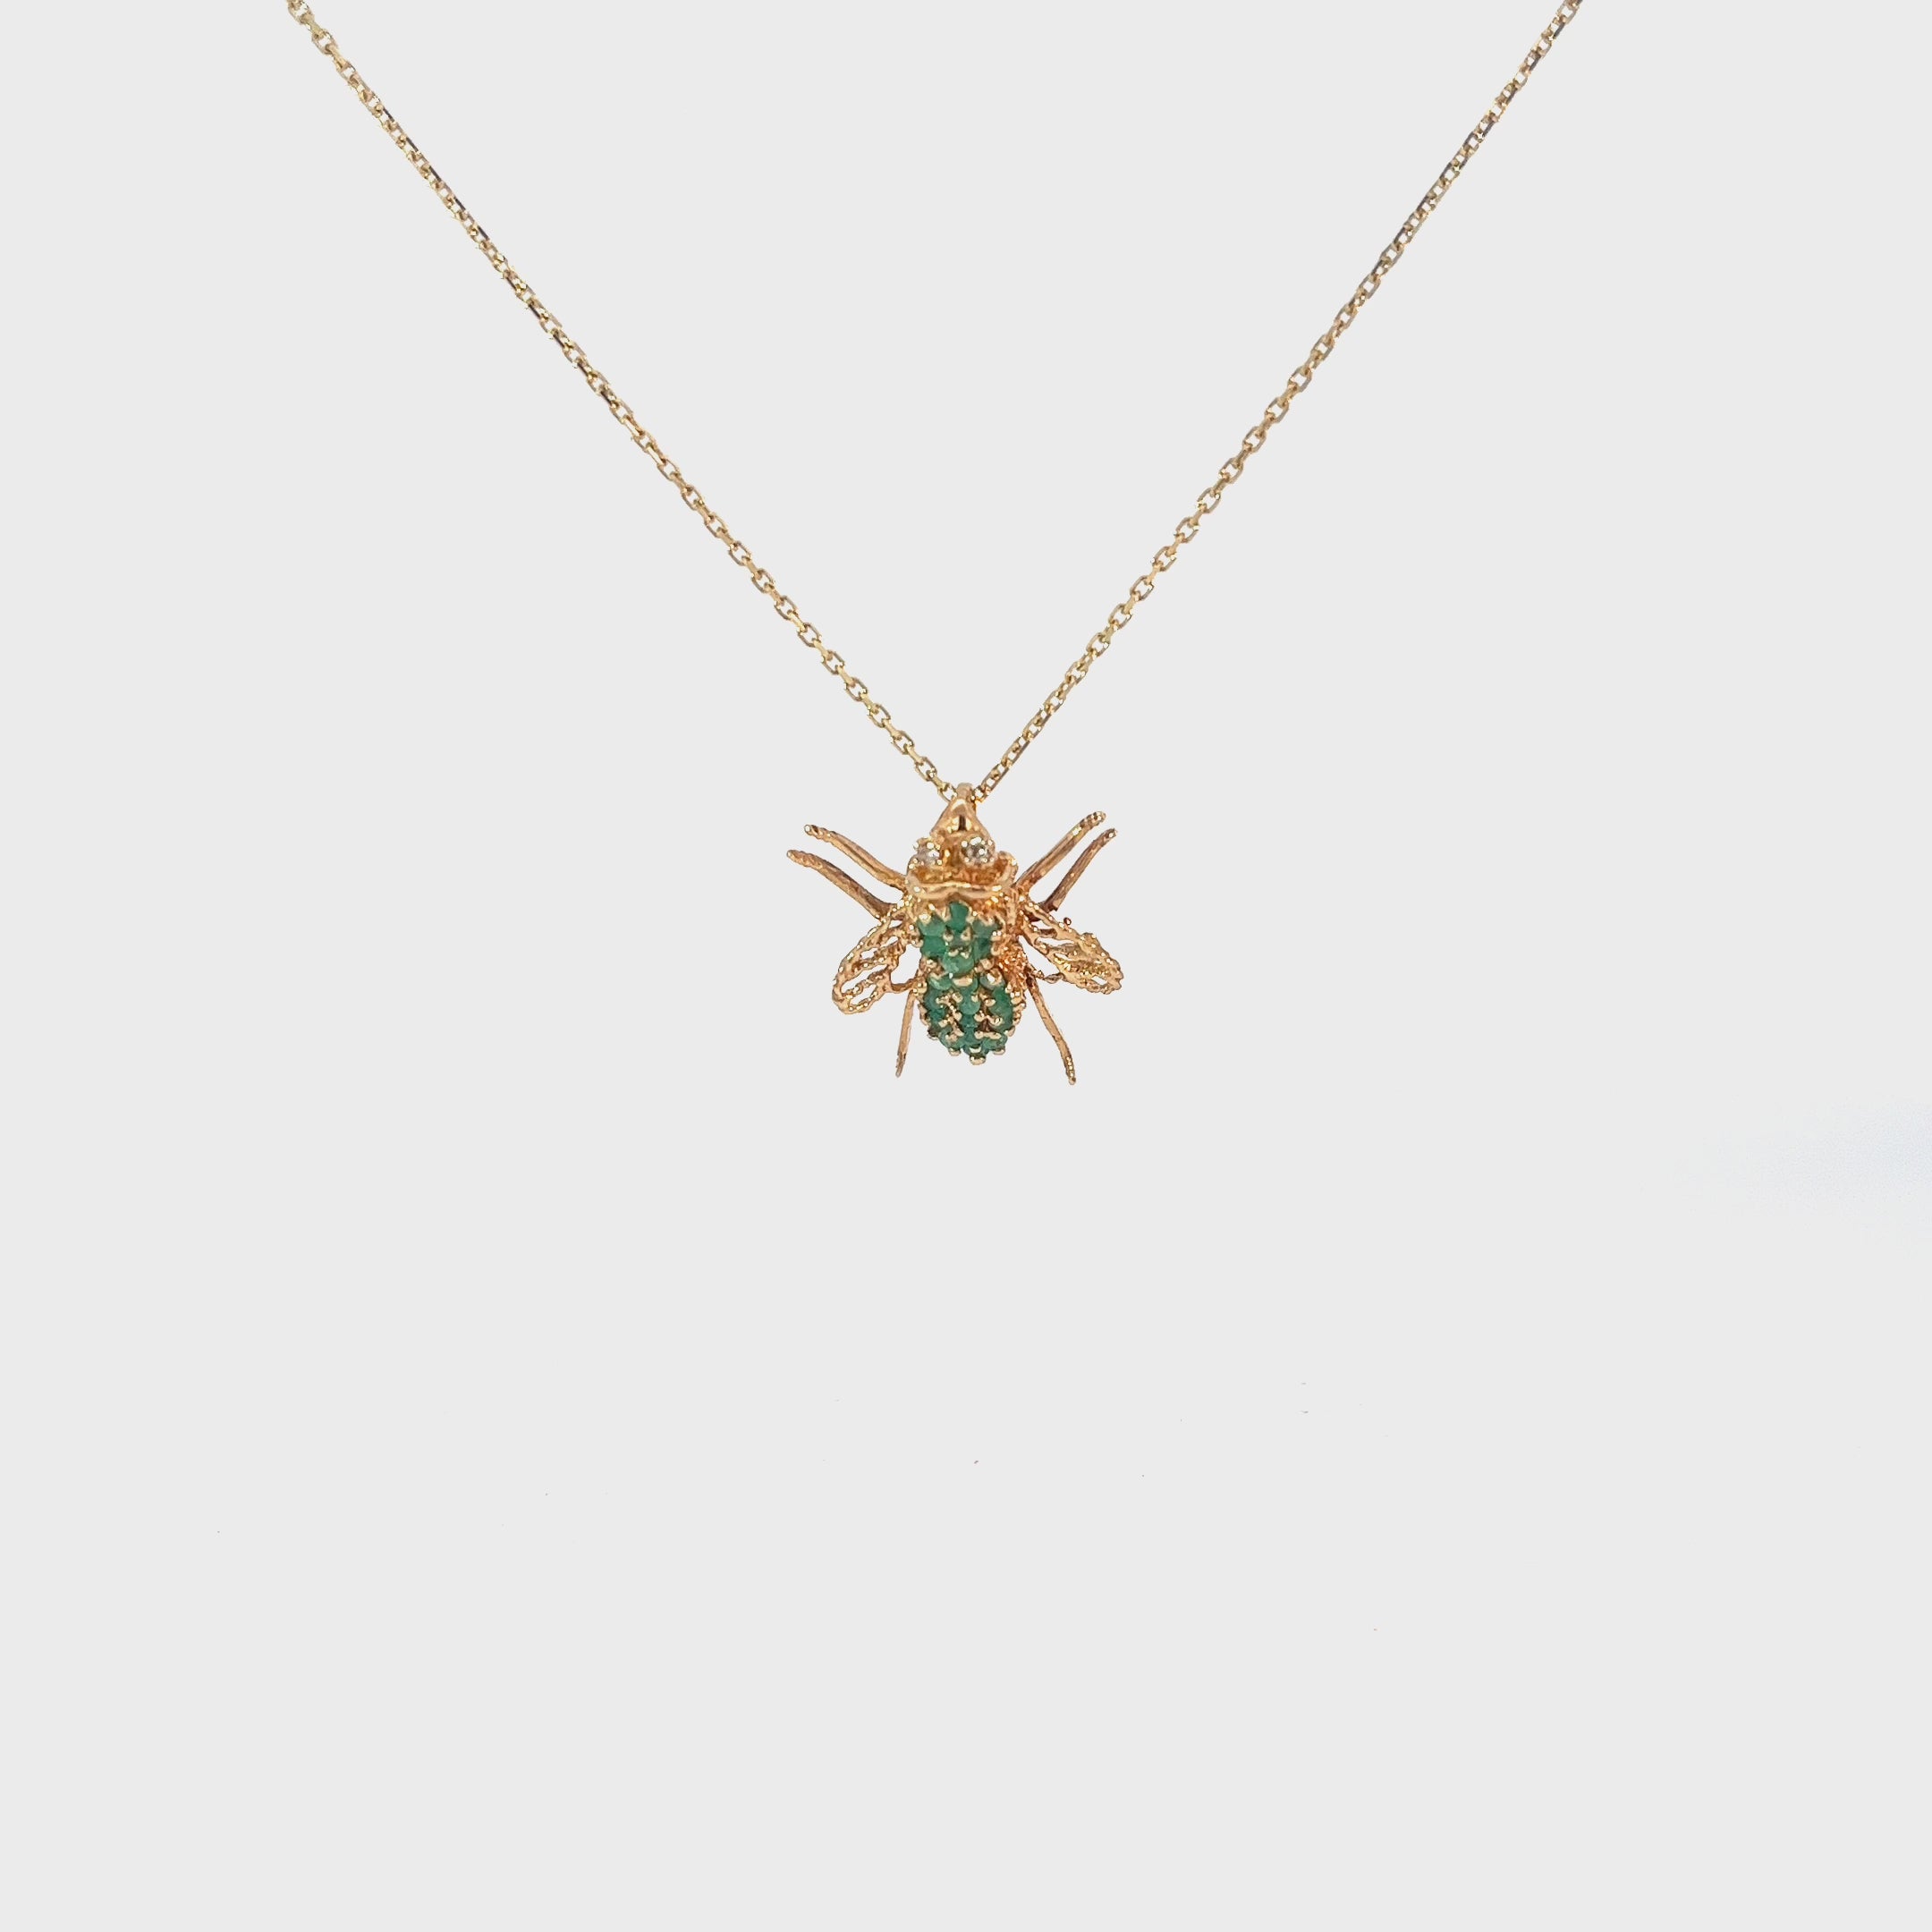 Ladies 14k Yellow Gold Emerald and Diamond Bee Necklace